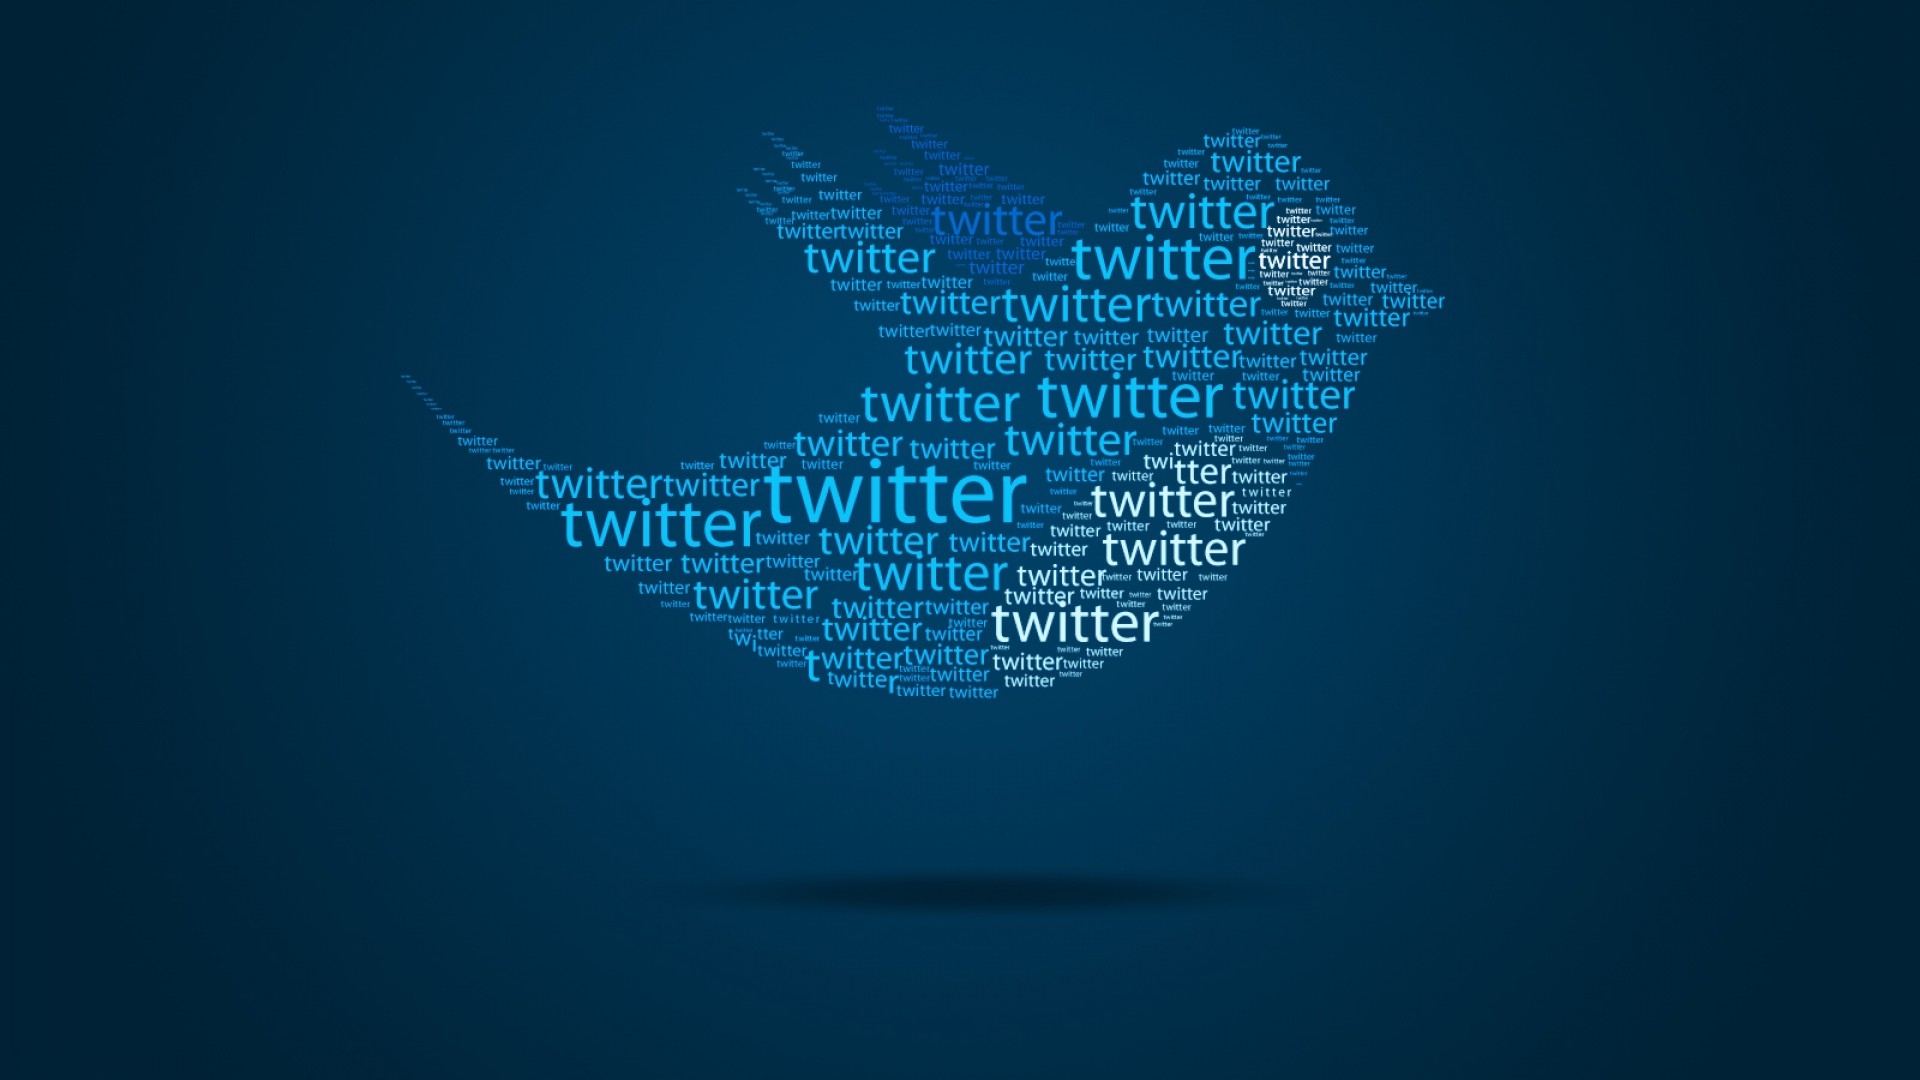 HD desktop wallpaper featuring a Twitter logo composed of multiple Twitter text elements on a blue background, symbolizing technology and connectivity.